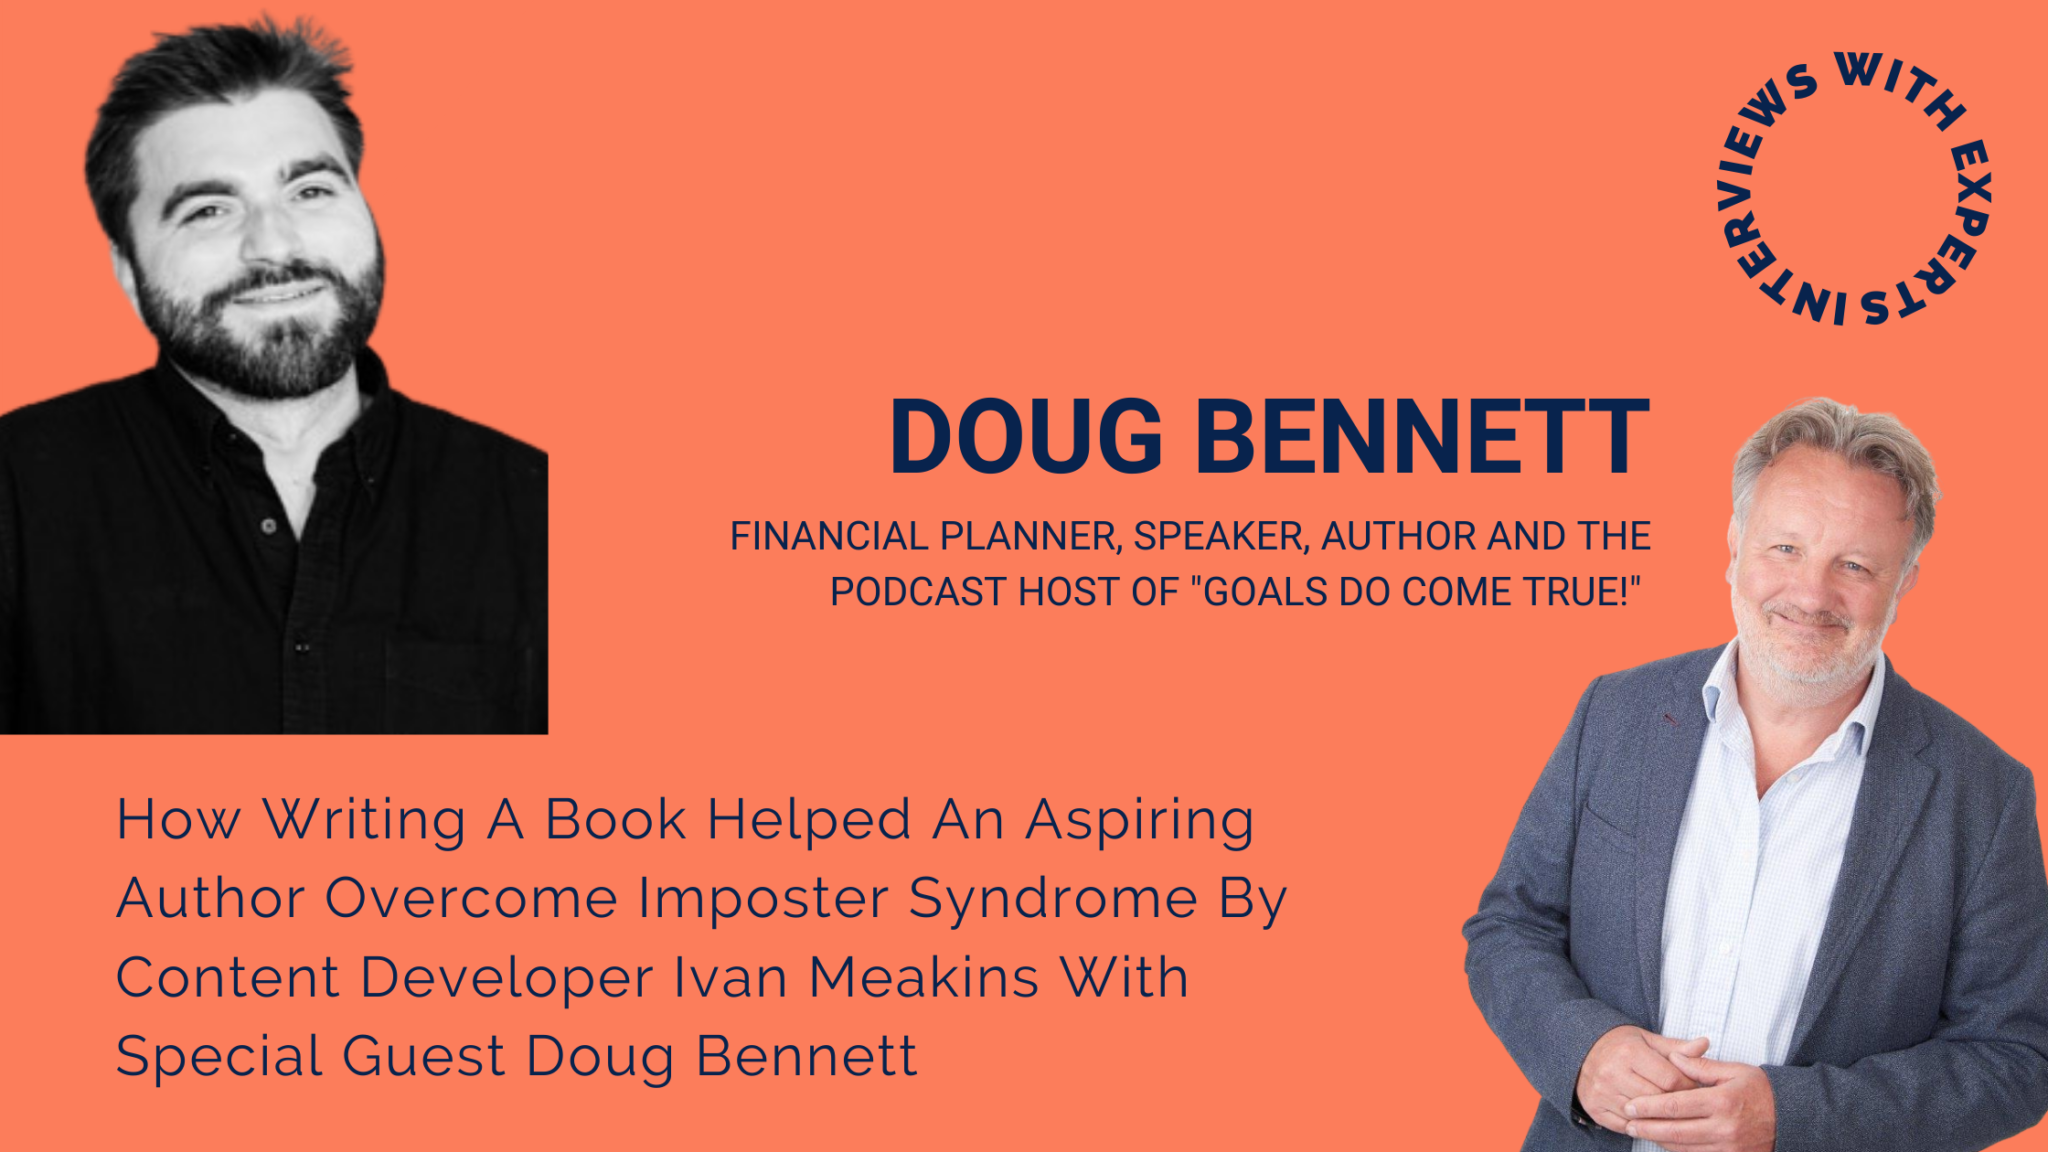 How Writing A Book Helped An Aspiring Author Overcome Imposter Syndrome By Content Developer Ivan Meakins With Special Guest Doug Bennett